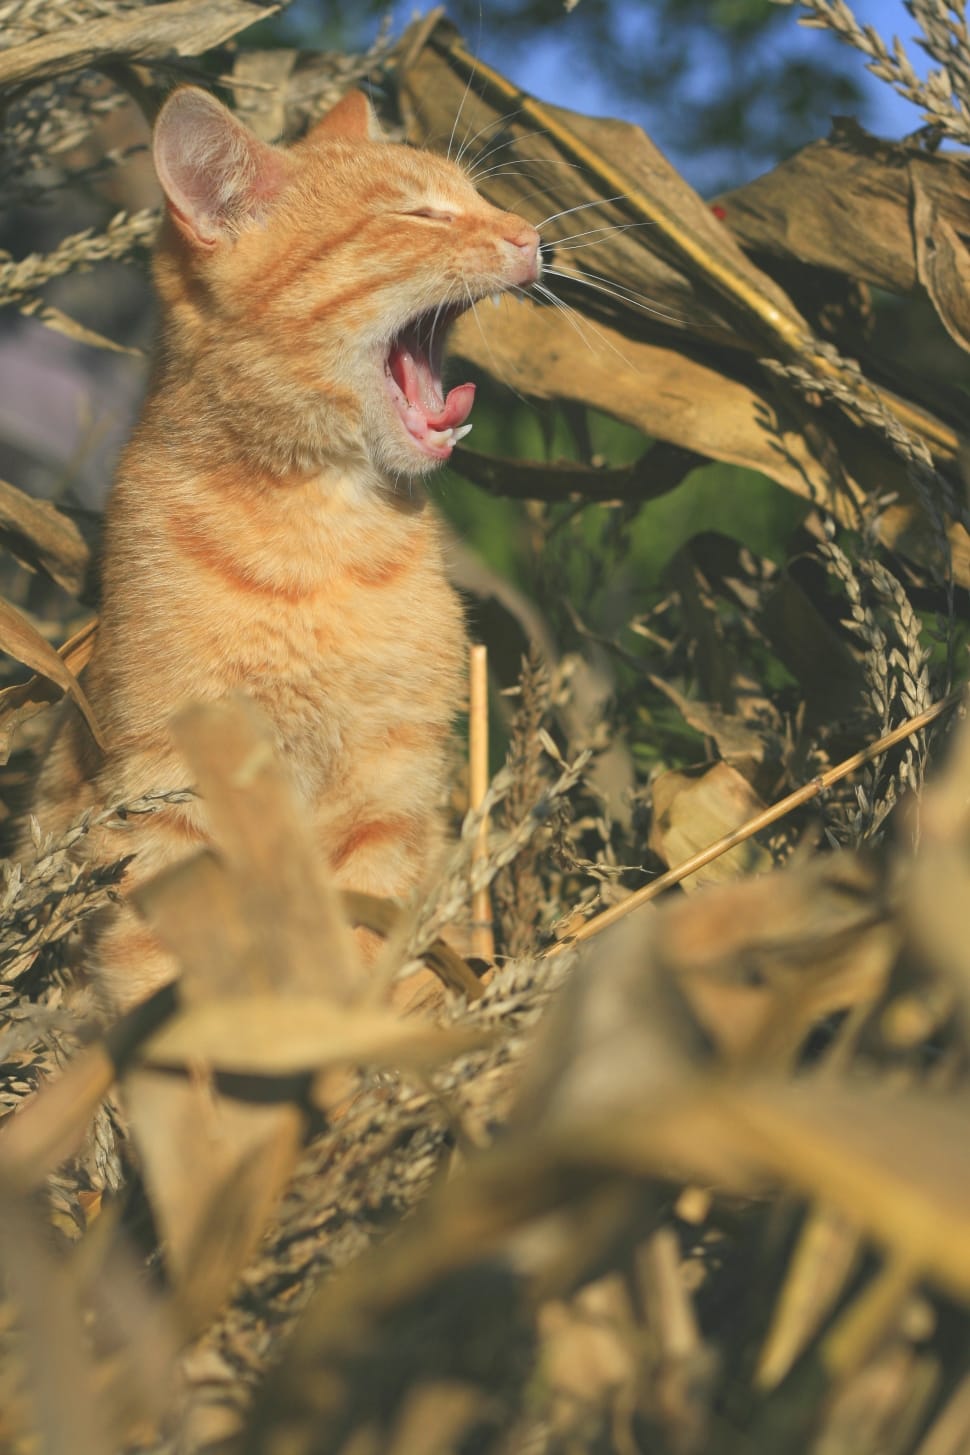 Out, Nature, Tomcat, Cat, Leaves, Autumn, one animal, mouth open preview